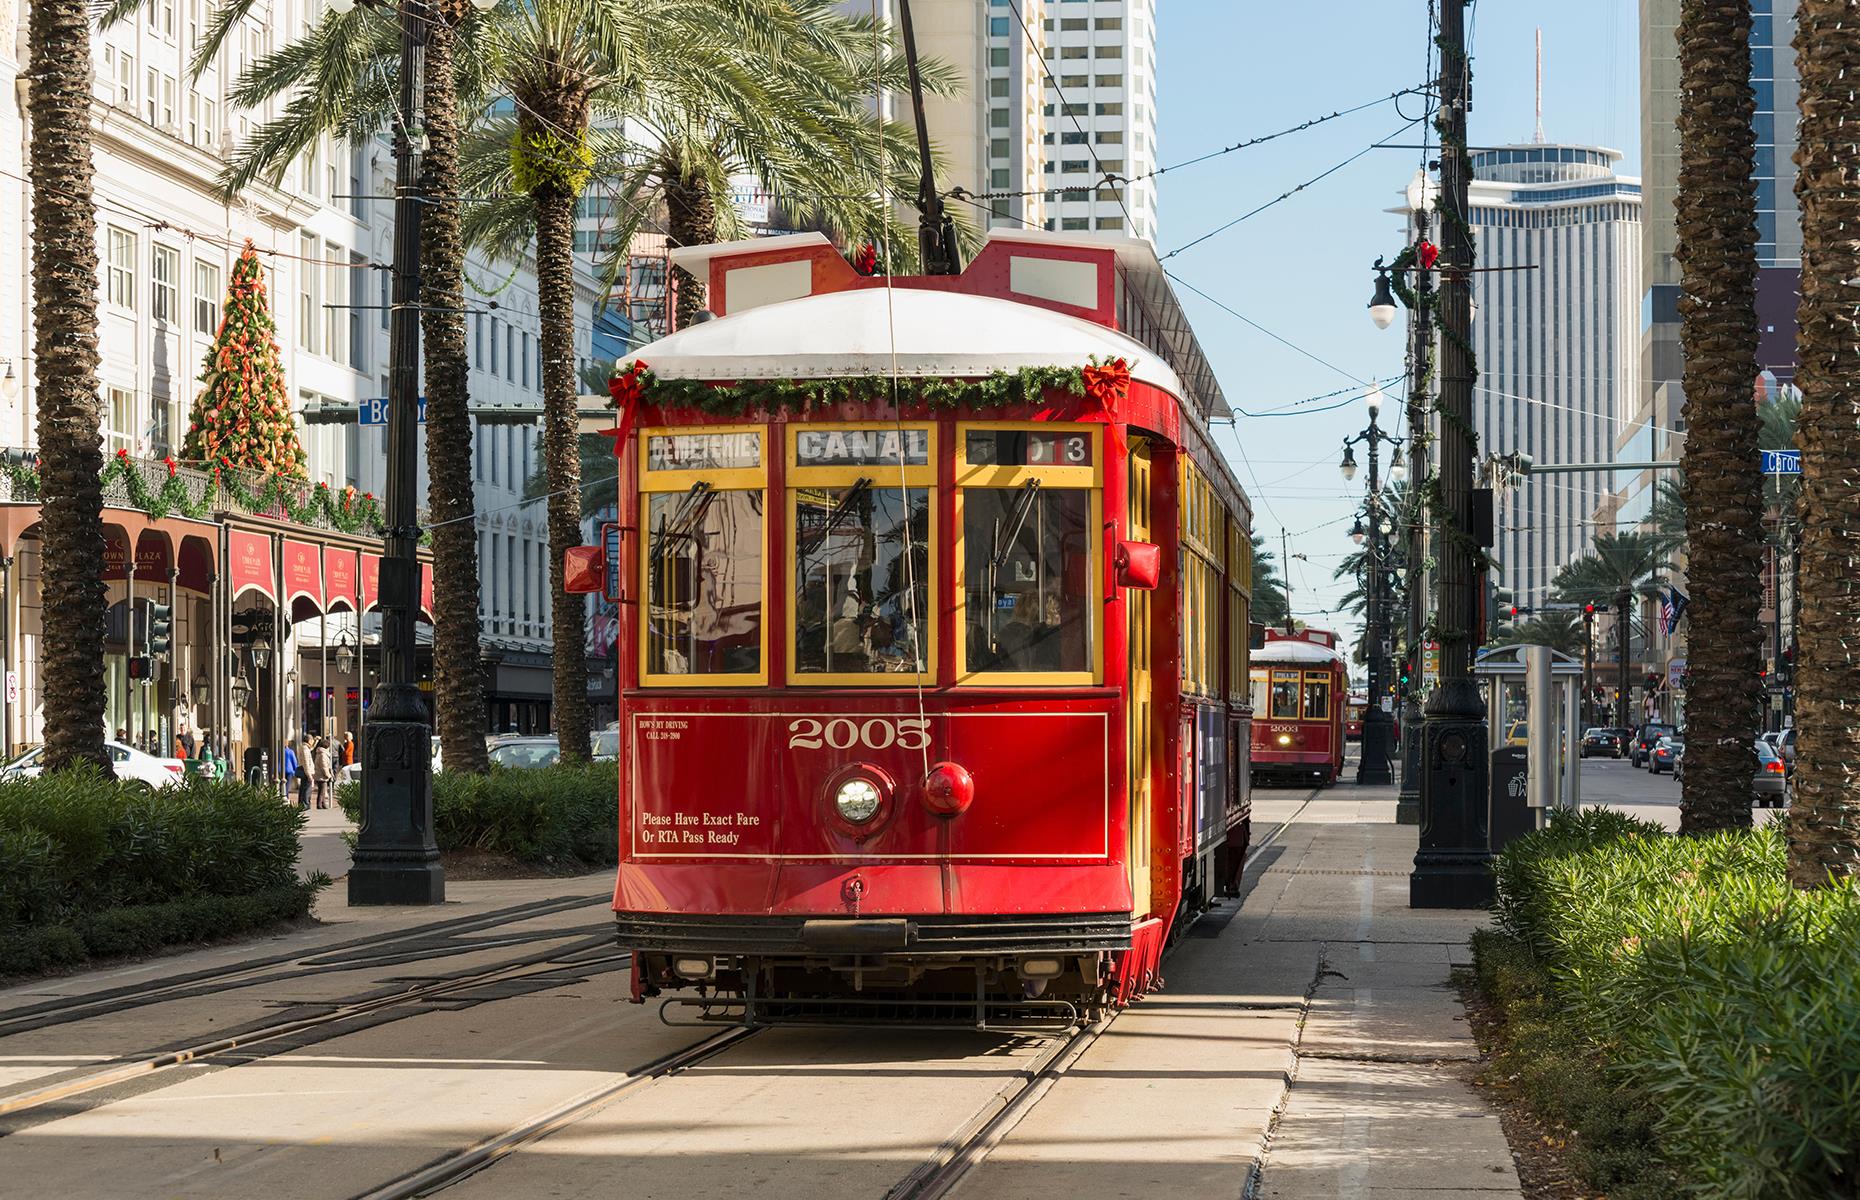 <p>It is actively advised to leave your car behind when exploring <a href="http://www.loveexploring.com/guides/74898/explore-new-orleans-the-top-things-to-do-where-to-stay-what-to-eat">the Big Easy</a>, and make the most of the city's famous streetcar system. It connects key areas like the Riverfront and the French Quarter, while the St Charles Avenue Streetcar in particular provides a scenic, tree-lined trip past stunning historic mansions. Beyond the streetcars, the <a href="https://www.norta.com/ride-with-us/how-to-pay/jazzy-passes">RTA's Jazzy Pass</a> gives visitors unlimited access to the city's public transport, while numerous bike paths stretch along the Mississippi River and through City Park. Don't miss out on a riverboat cruise either for a shifting panorama of the city skyline.</p>